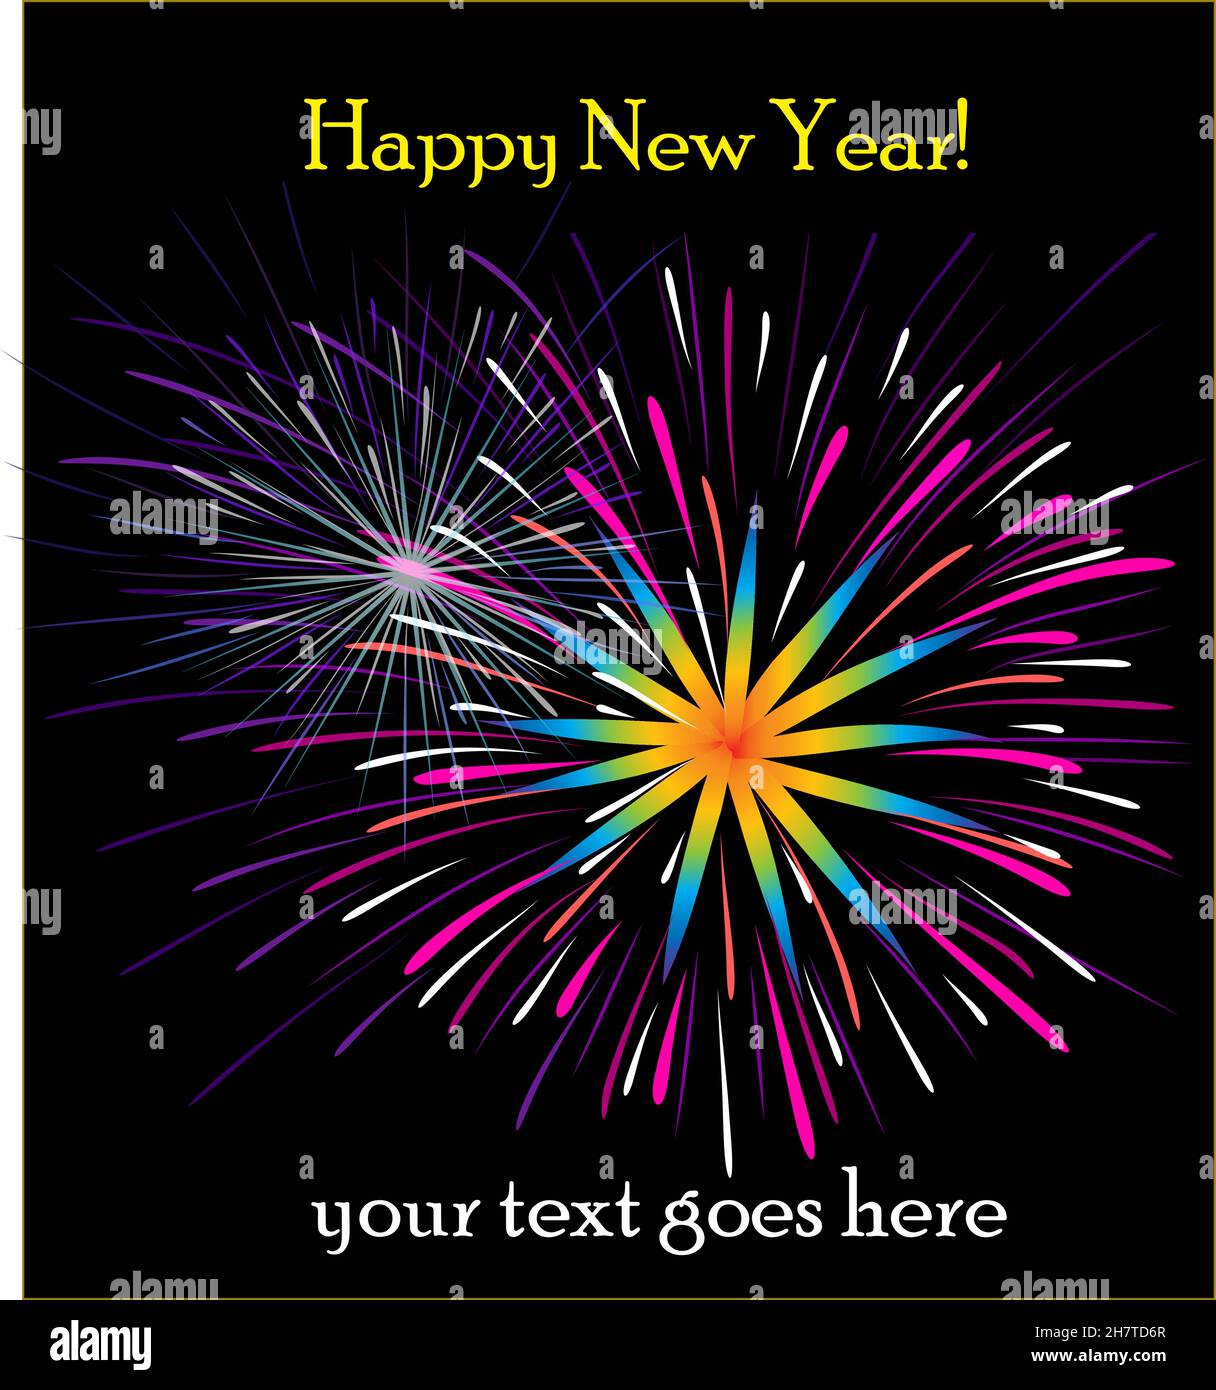 New Year fireworks vector illustration isolated on a black background Stock Vector